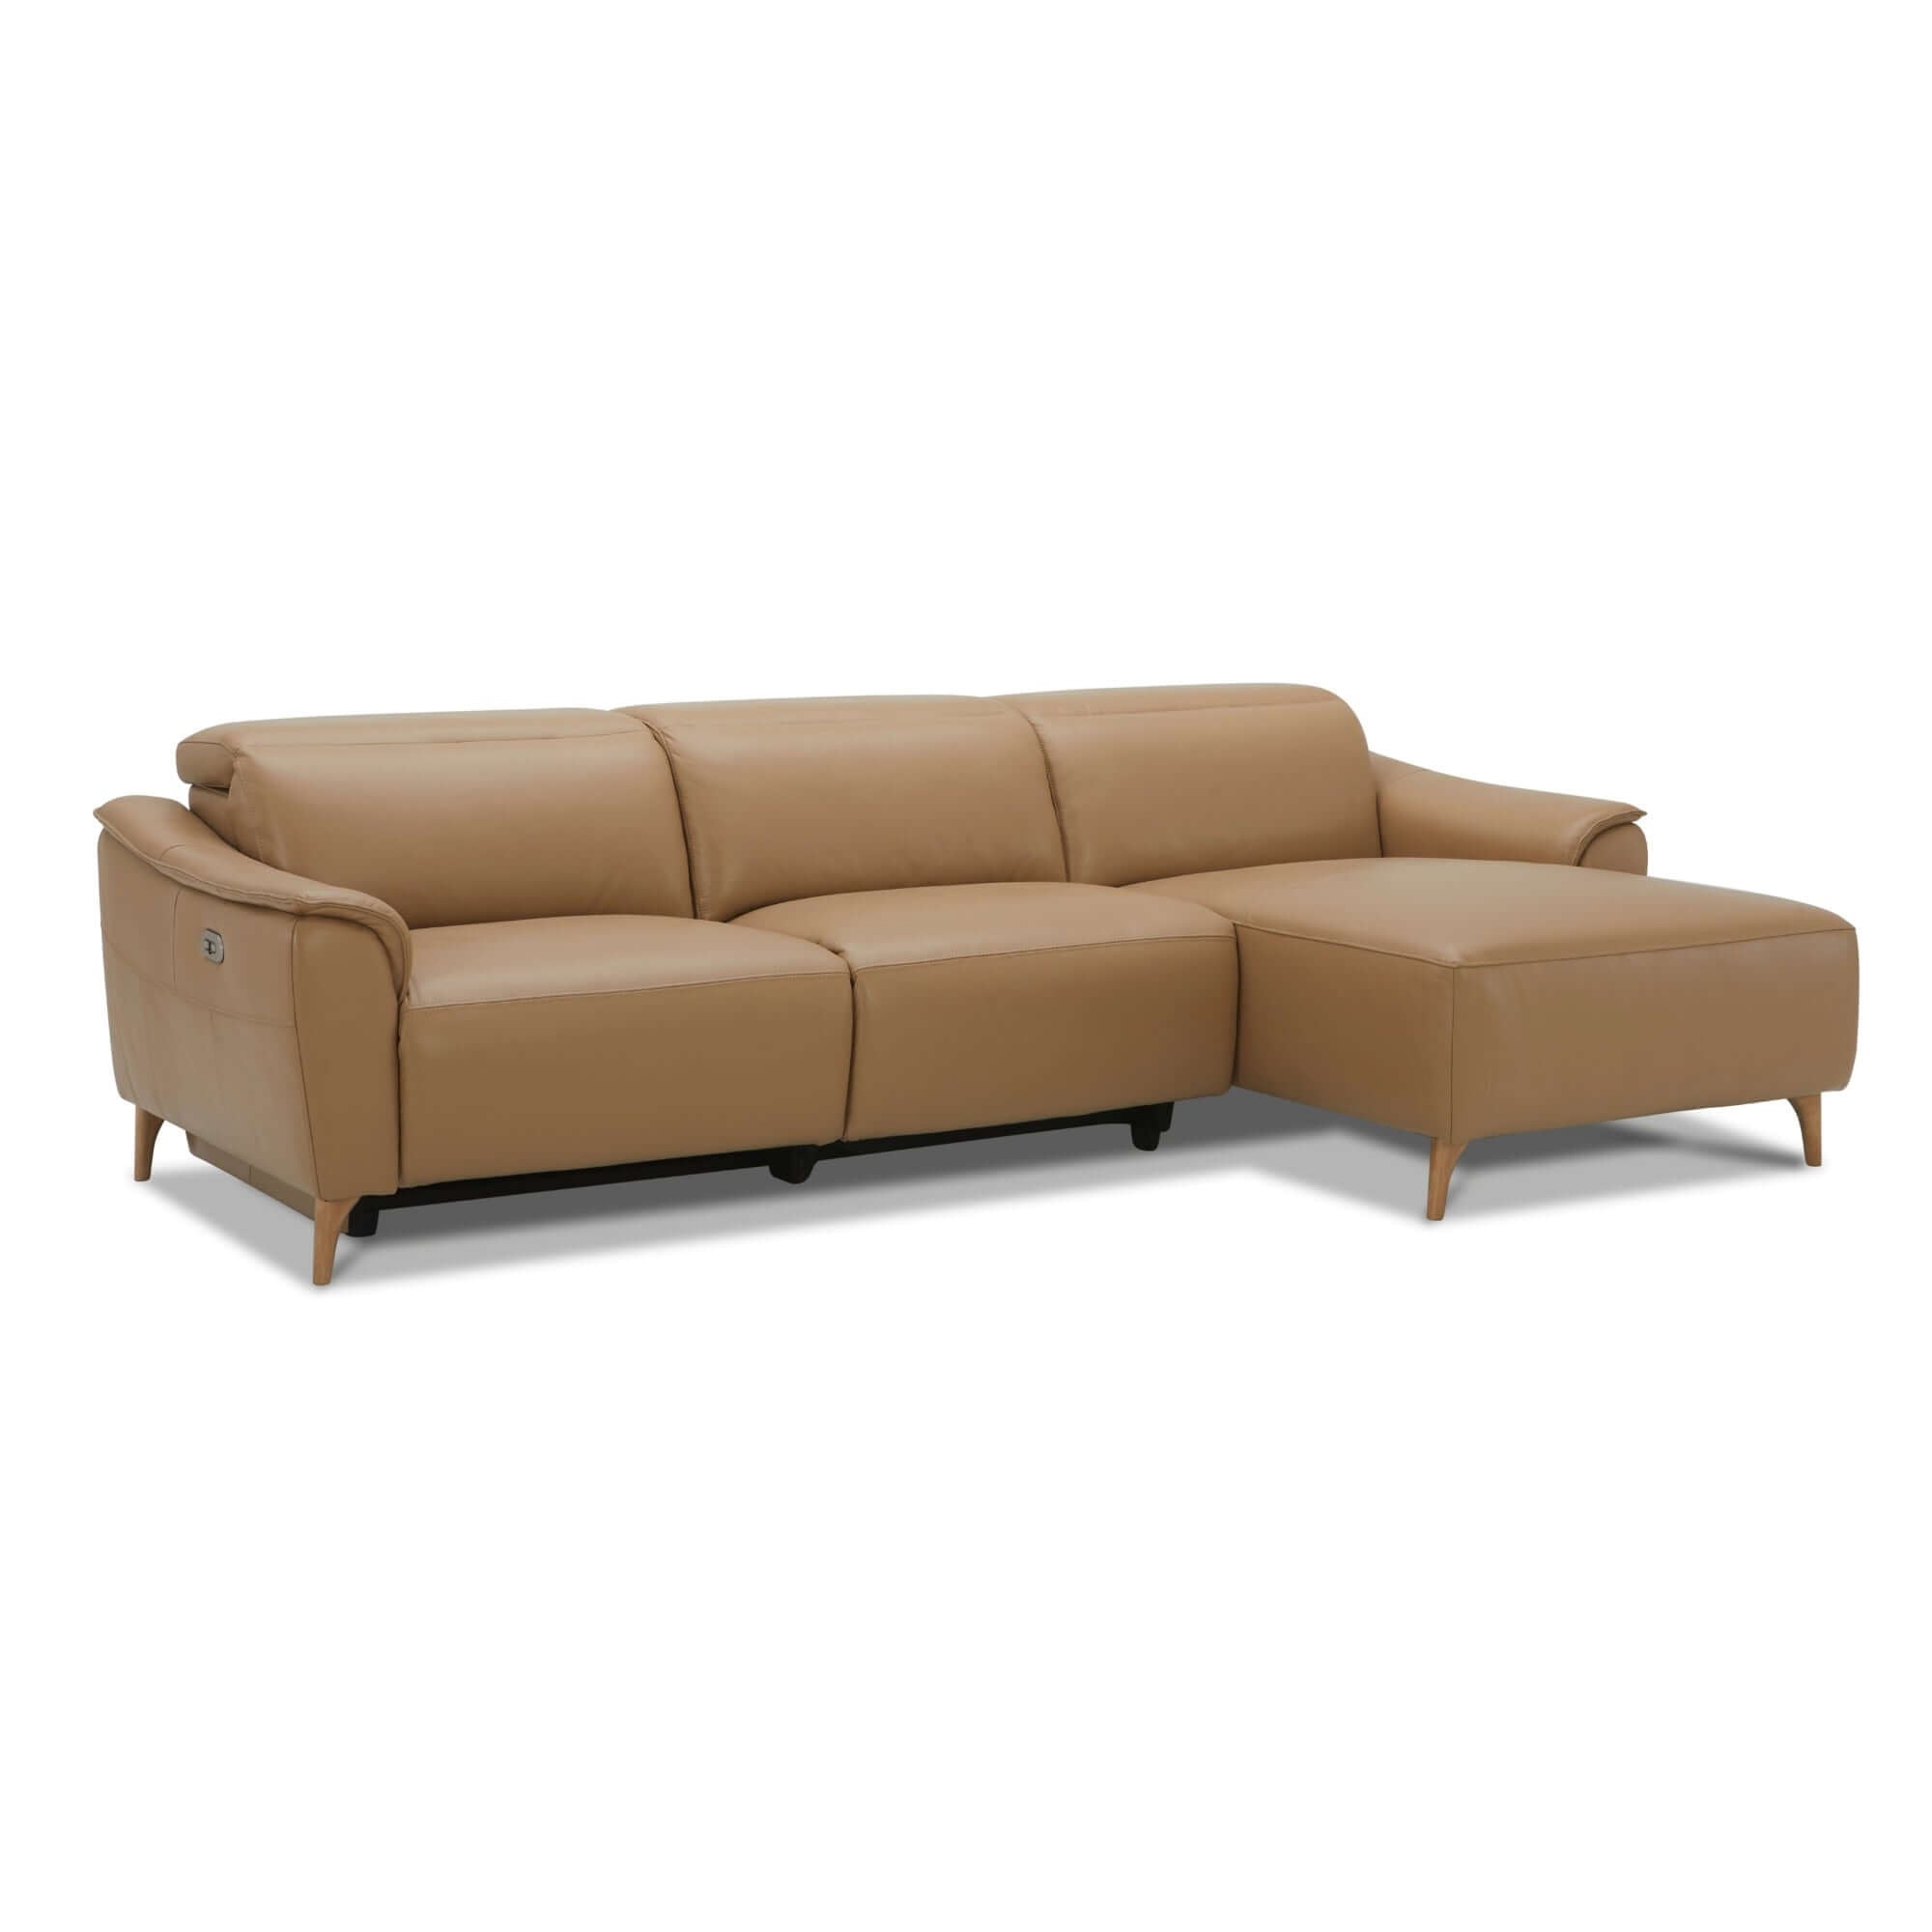 Inala Leather Sofa Electric Recliner - 2 Seater-Upinteriors